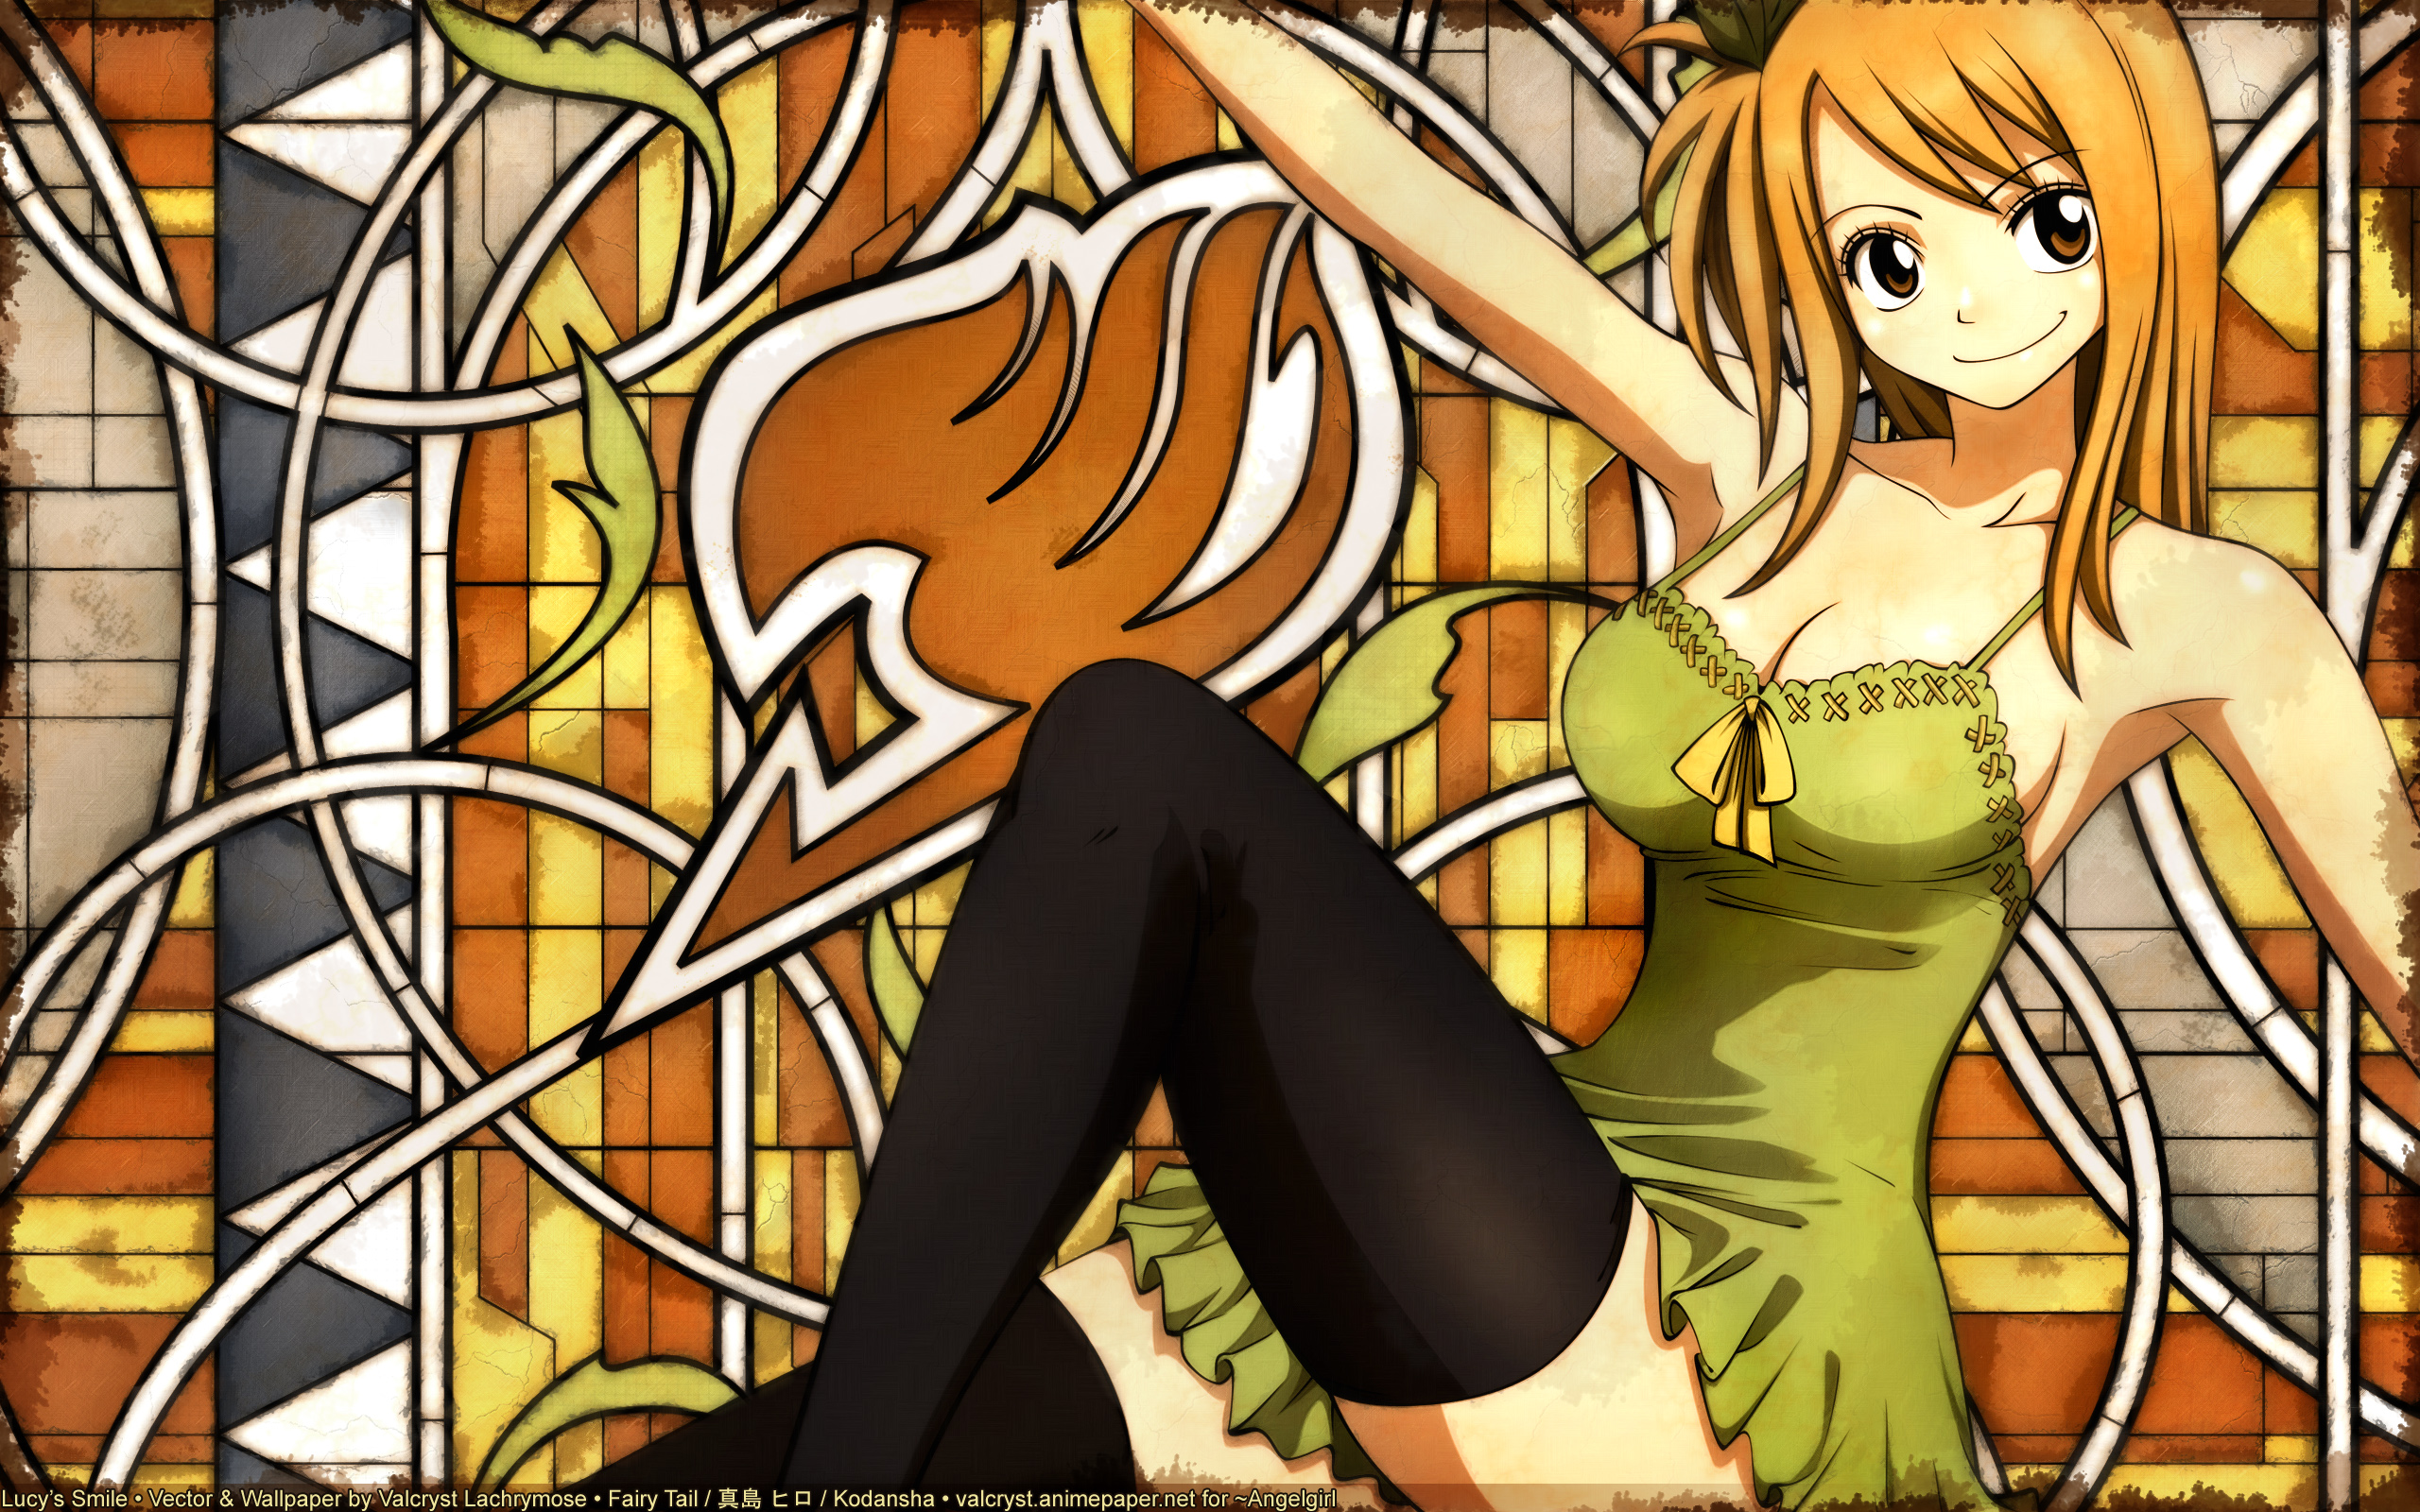 Fairy Tail Images Lucy Heartfilia  Hd Wallpaper And  Lucy Heartfilia Head  PNG Image  Transparent PNG Free Download on SeekPNG